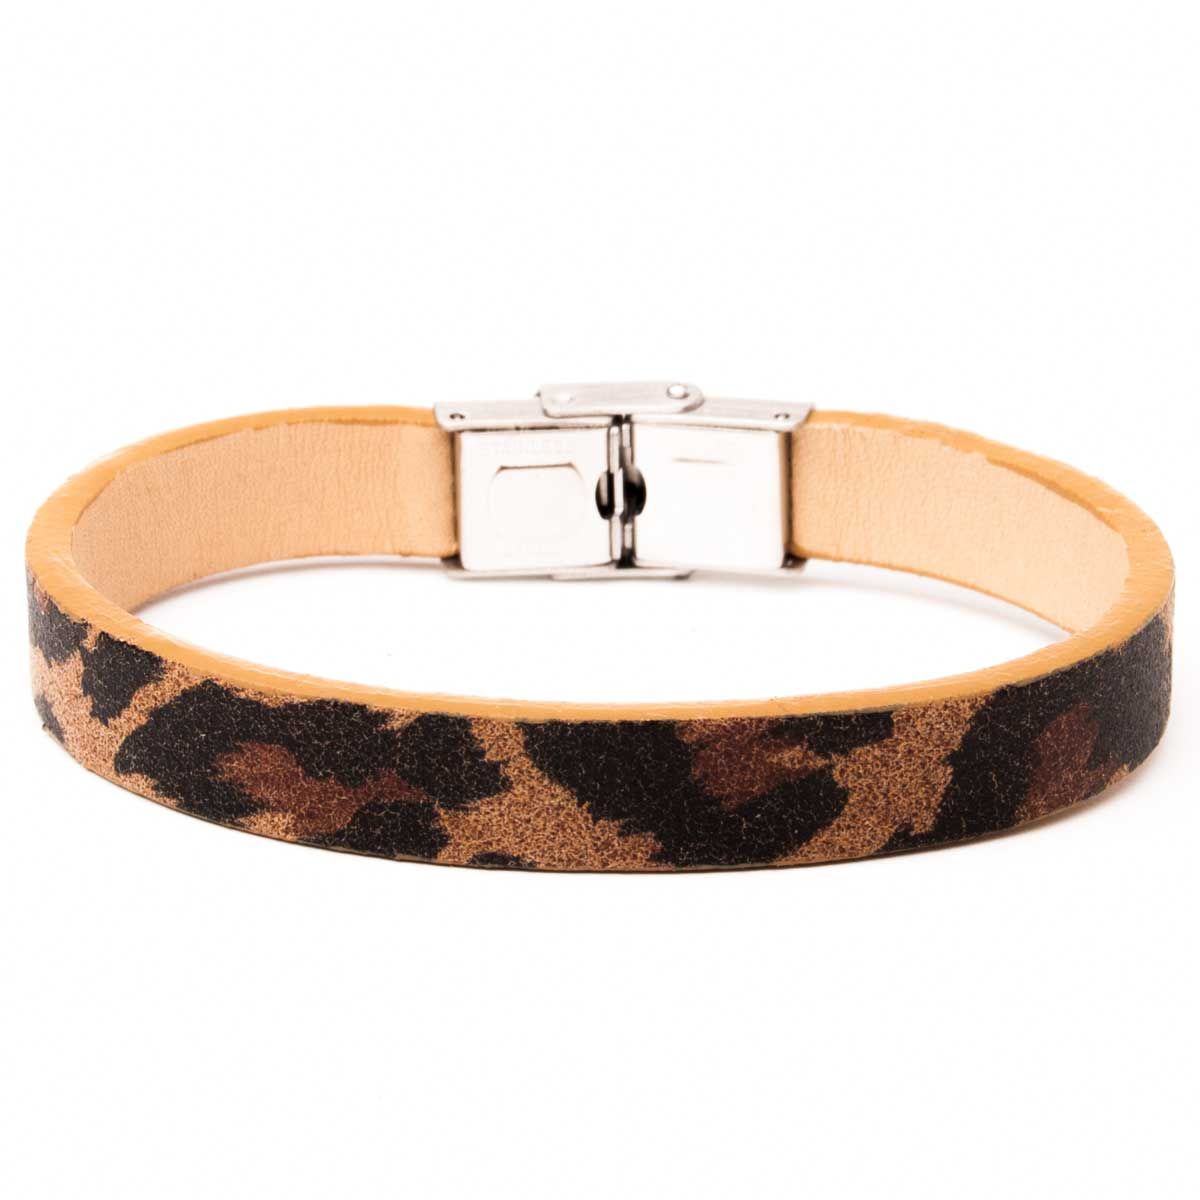 Original natural skin bracelet made of artisanally ideal for women and women. Handmade and with stainless stainless steel closure. Made in Spain. The width is 1 cm and the Standard length of 20 cm. It can be easily adapted home to the measure of each wrist thanks to its manual opening closure.